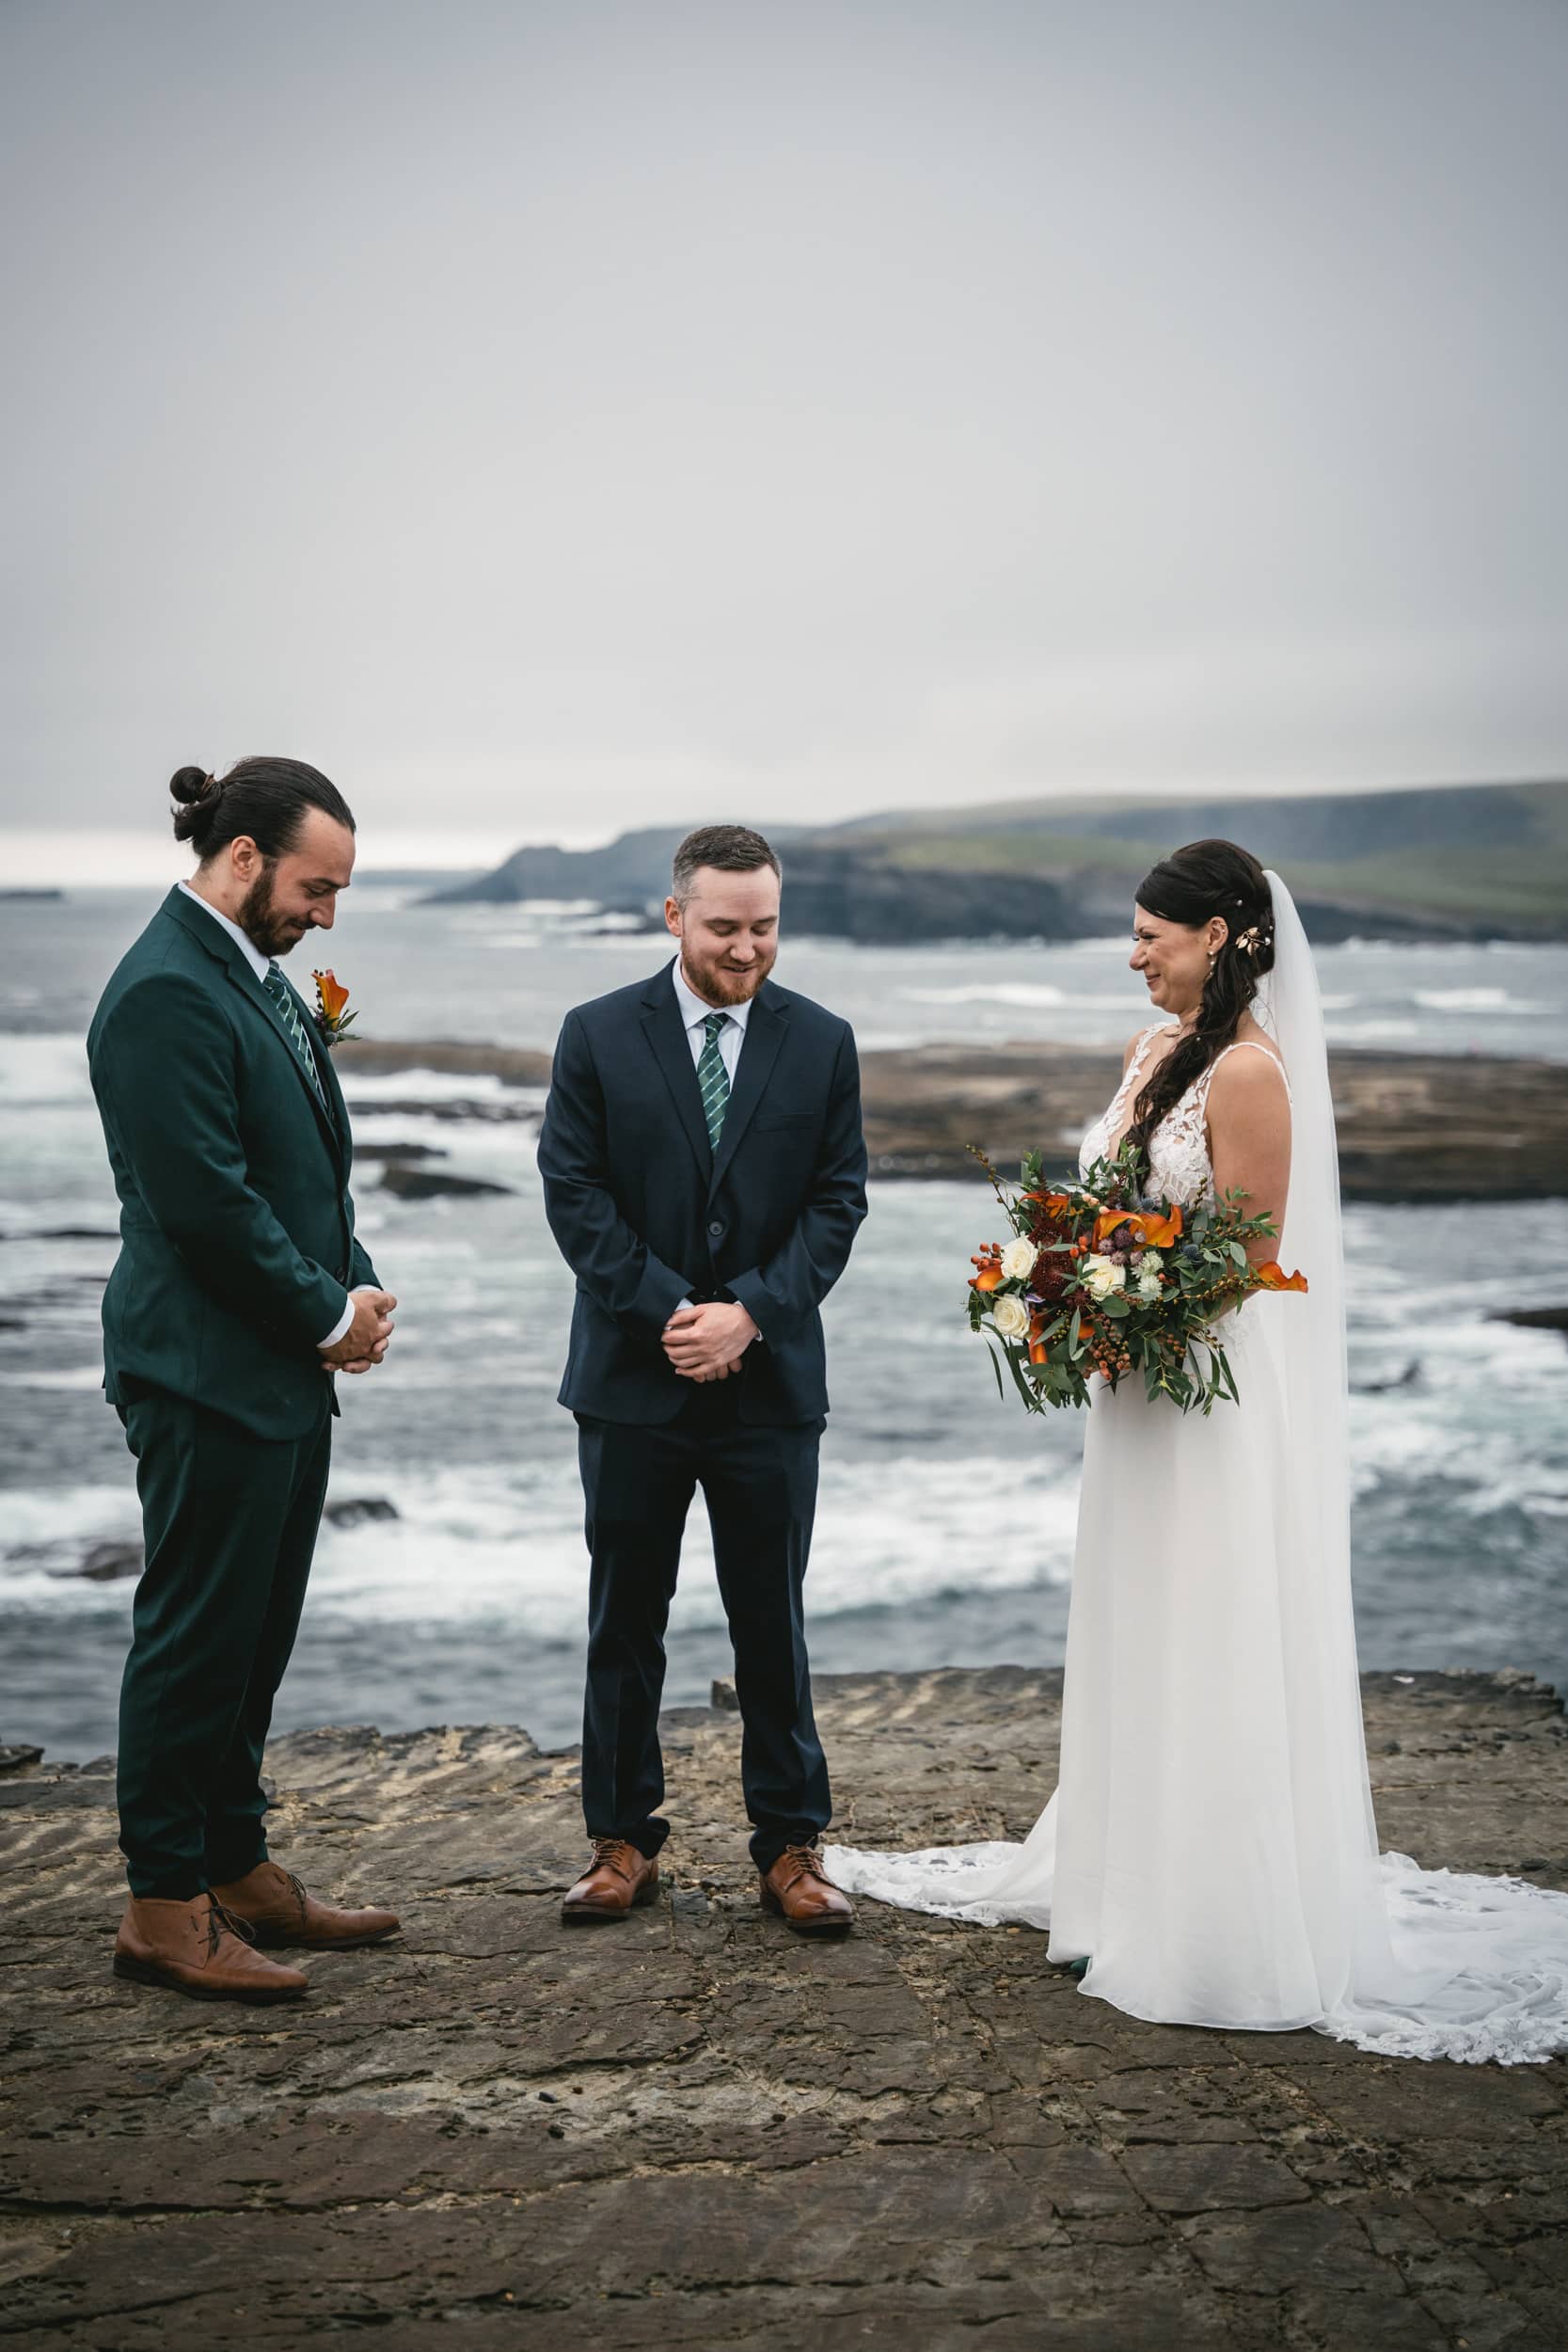 A touch of Ireland: Jesse and Sal's love story on the cliffs.